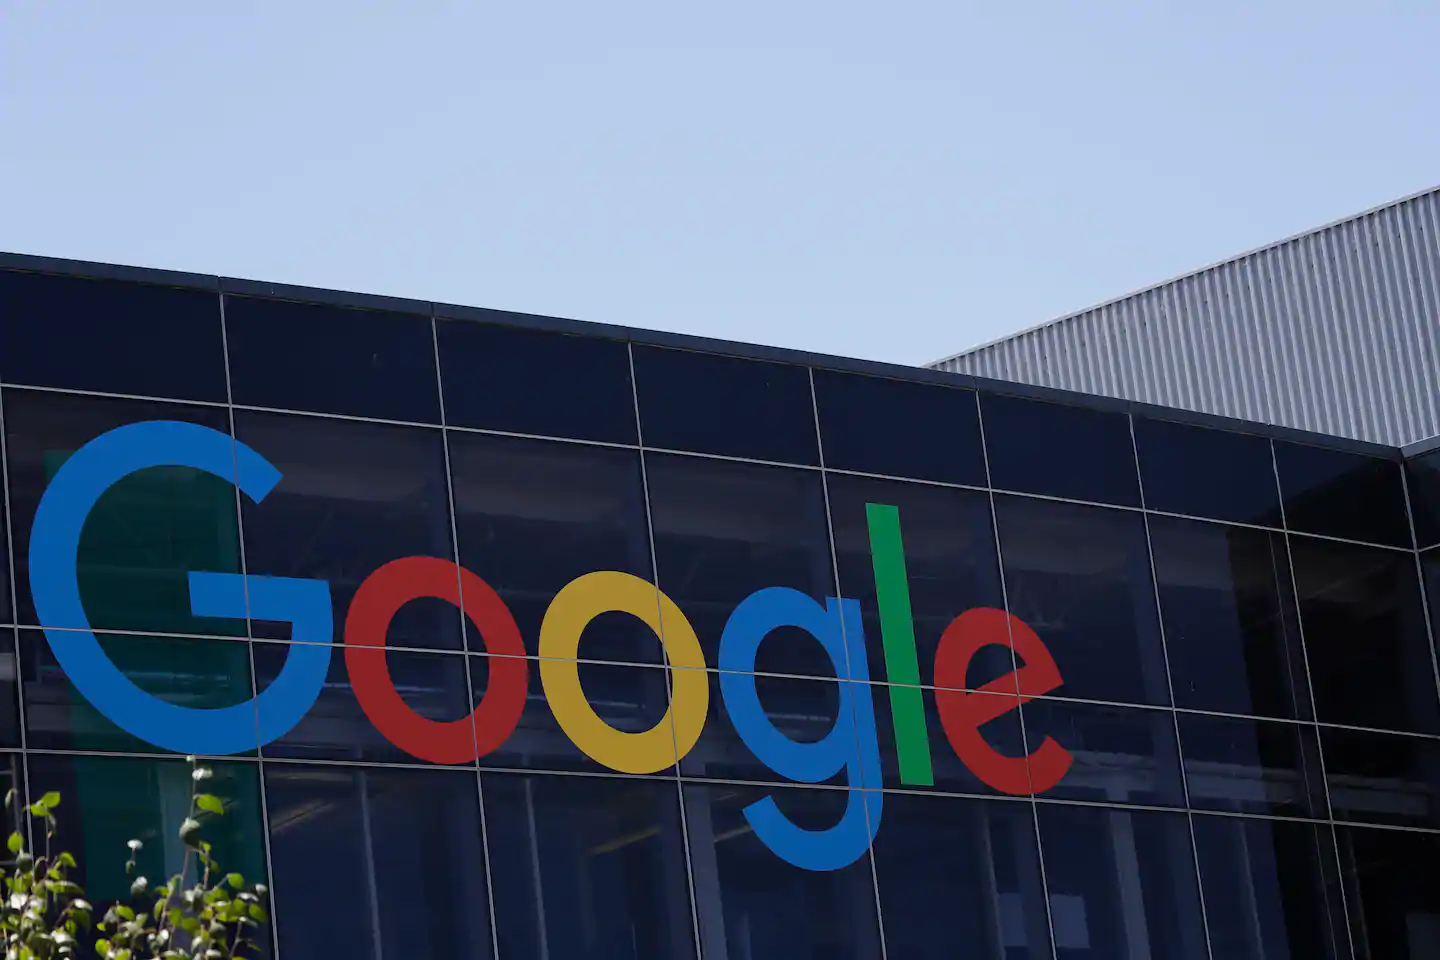 Google workers launch unconventional union with help of Communications Workers of America